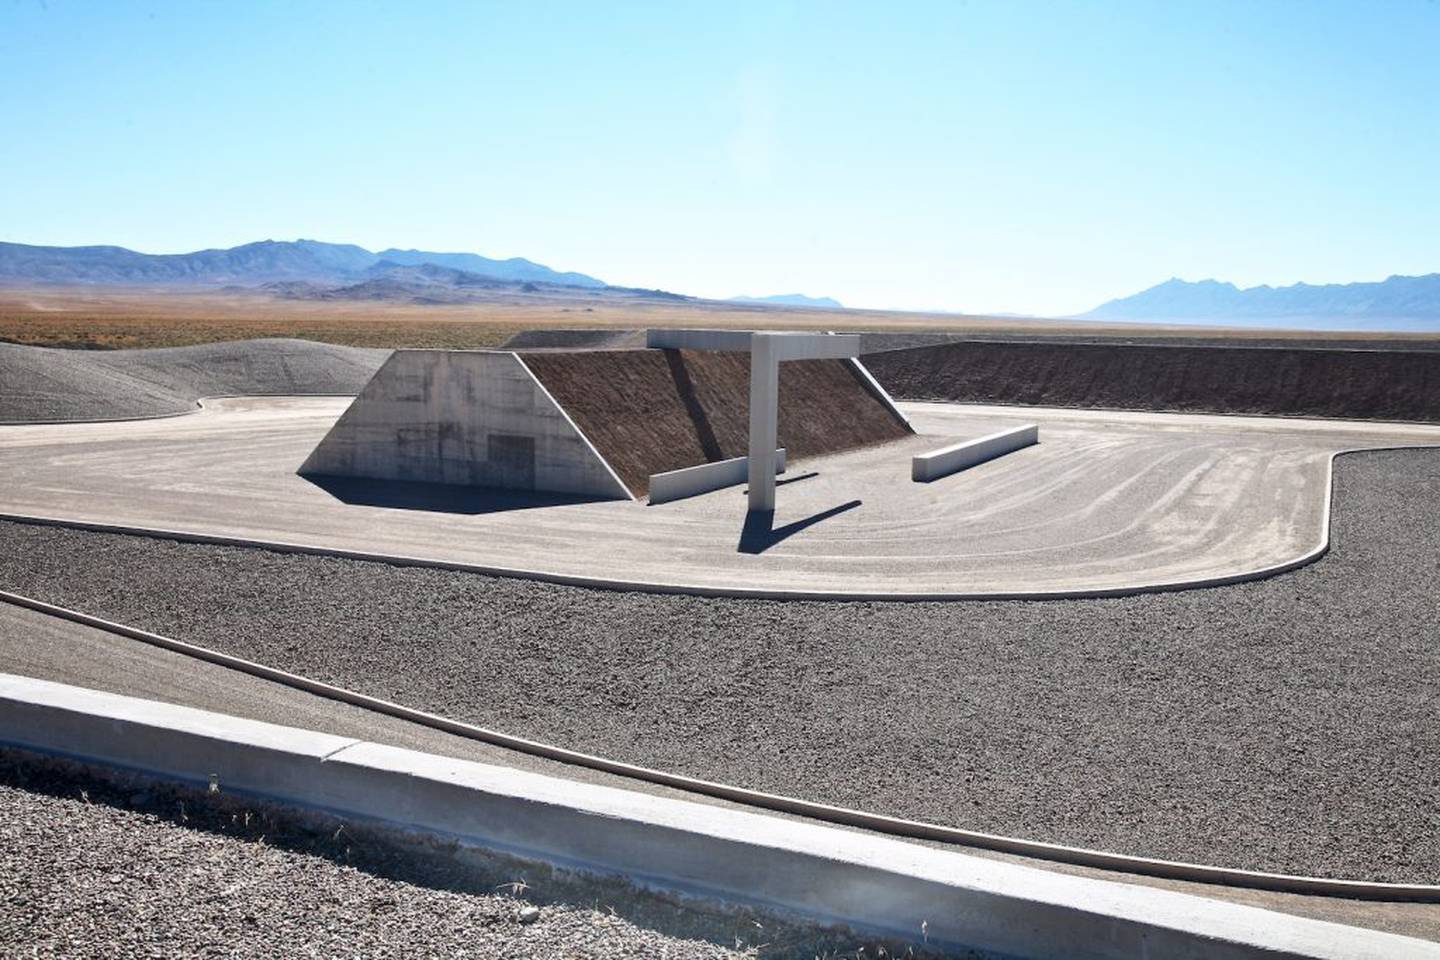 'Complex One' in Michael Heizer's 'City' project. Photo: Michael Heizer / Triple Aught Foundation